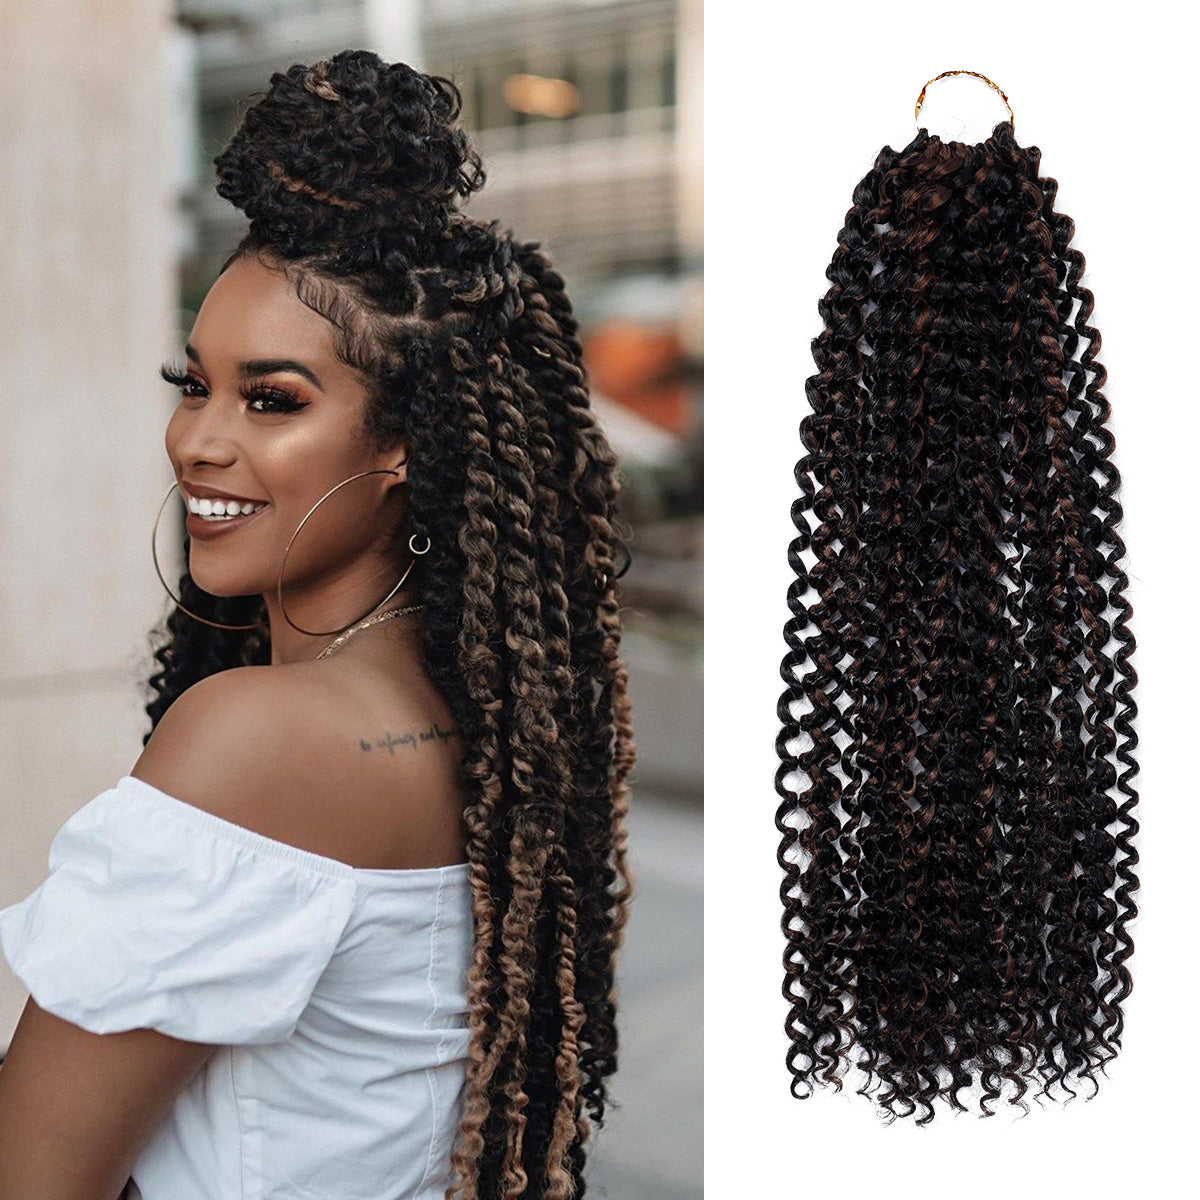 Authentic Synthetic Hair Crochet Braids 6X Value Pack Water Wave 22"